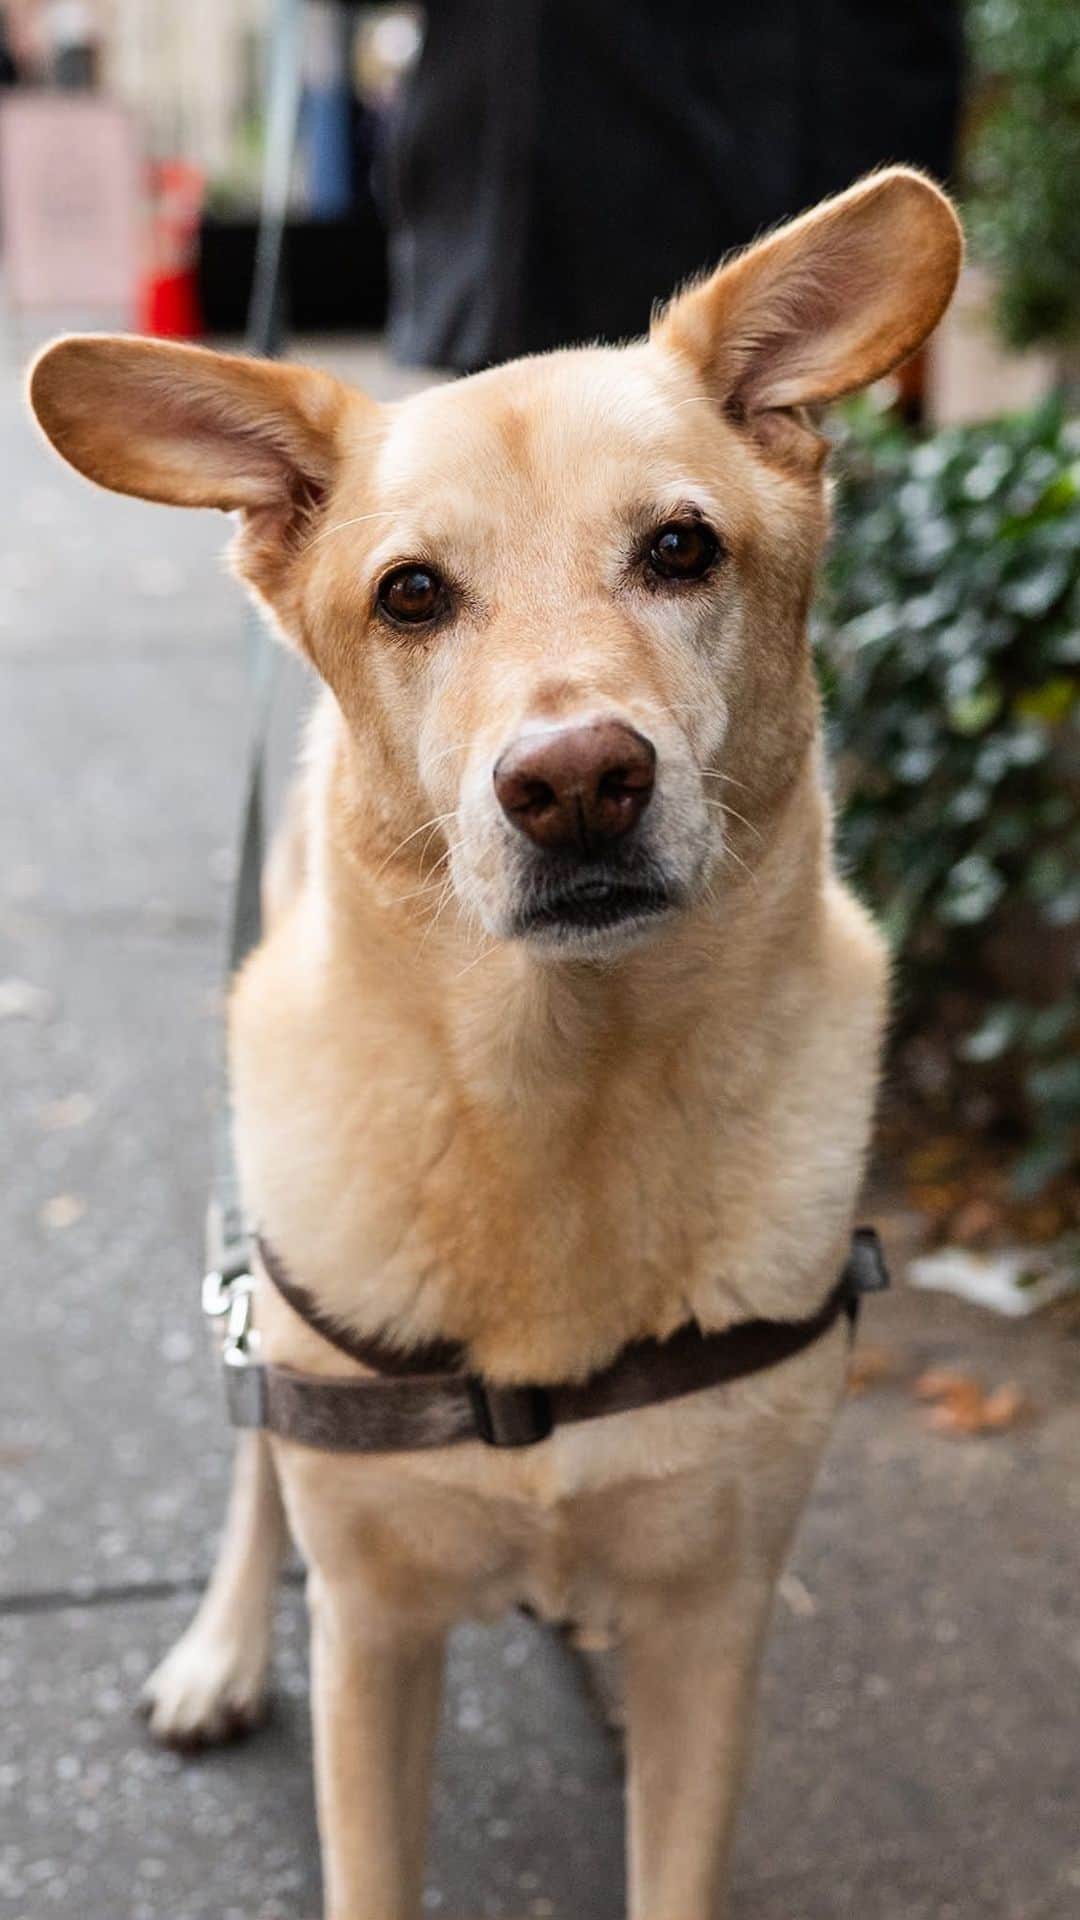 The Dogistのインスタグラム：「Arlo, mix (9 y/o), Hudson & Charles St., New York, NY • “His full name is Arlo Guthrie Marshmallow. He’s a rescue from Georgia – we got him at eight weeks. He’s a sweetie pie. He’s been getting seizures, so he’s on drugs for it. He loves other animals. I rescued an Eastern red bat here in New York – I found her on Hudson Street and named her My Little Baby. She’s currently on her way to a sanctuary in South Carolina. Arlo gave her a little nudge.”  Would you rescue an injured bat off the street?」